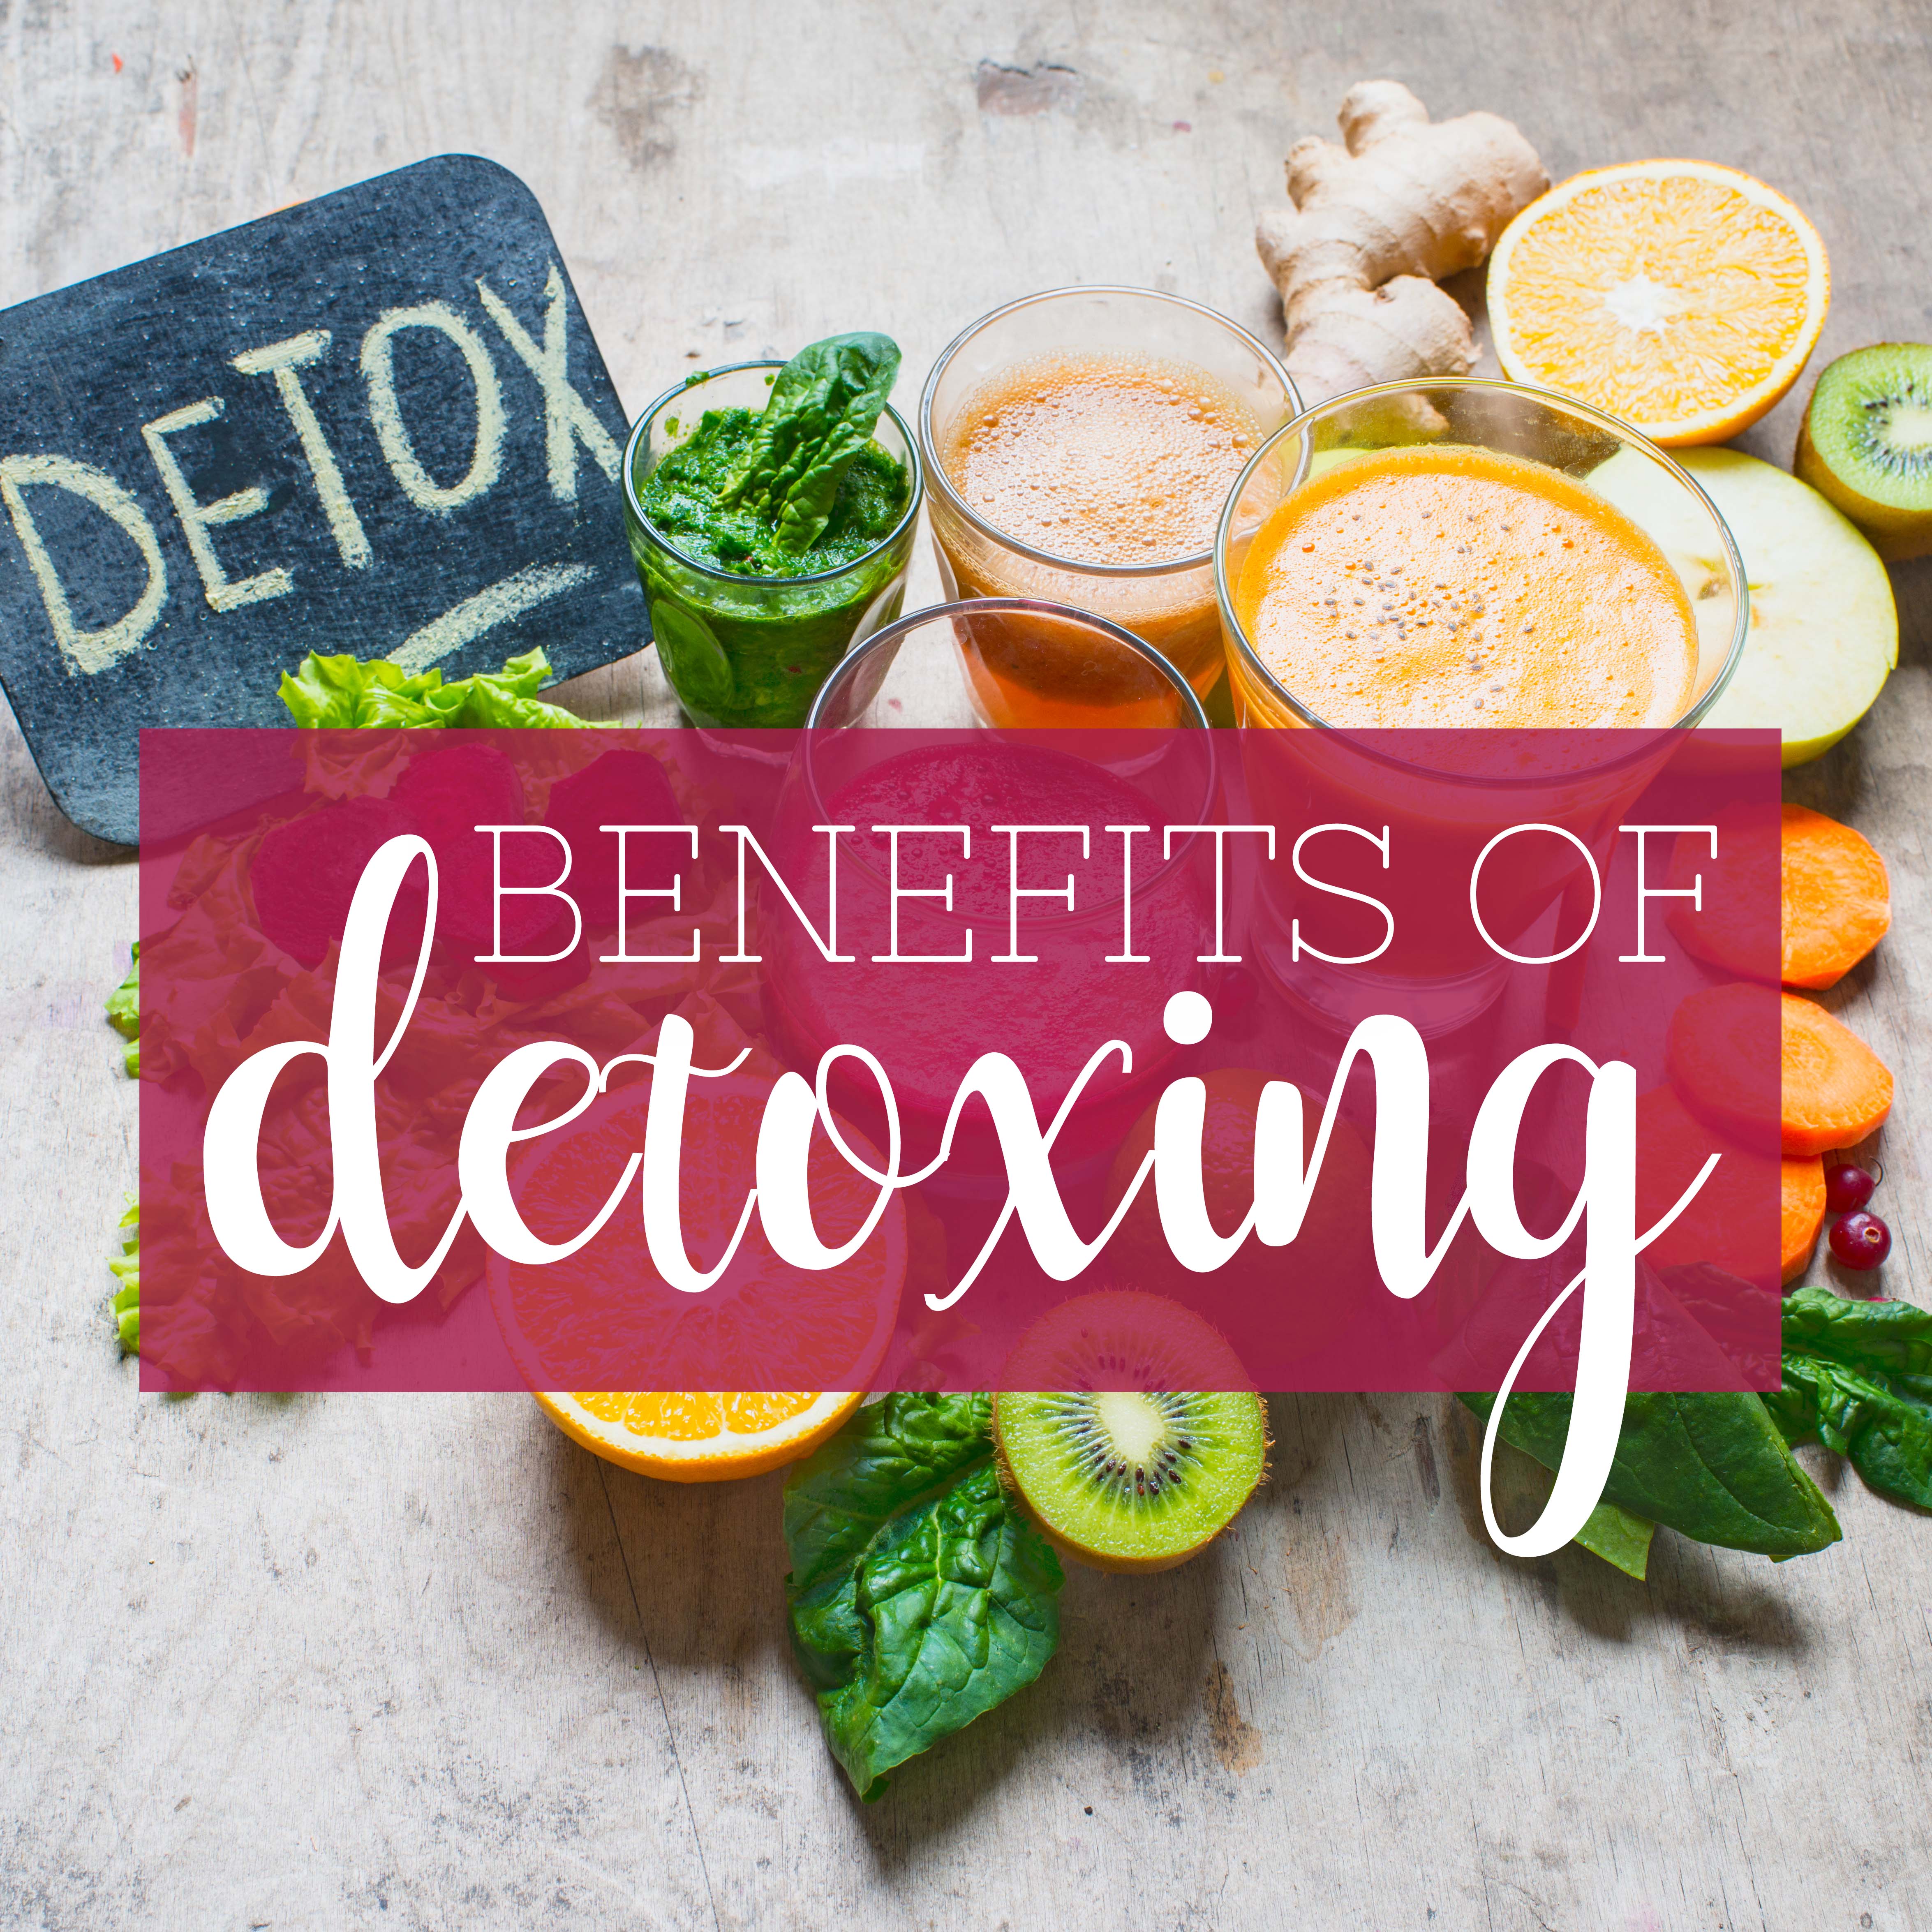 The Benefits of Detoxes